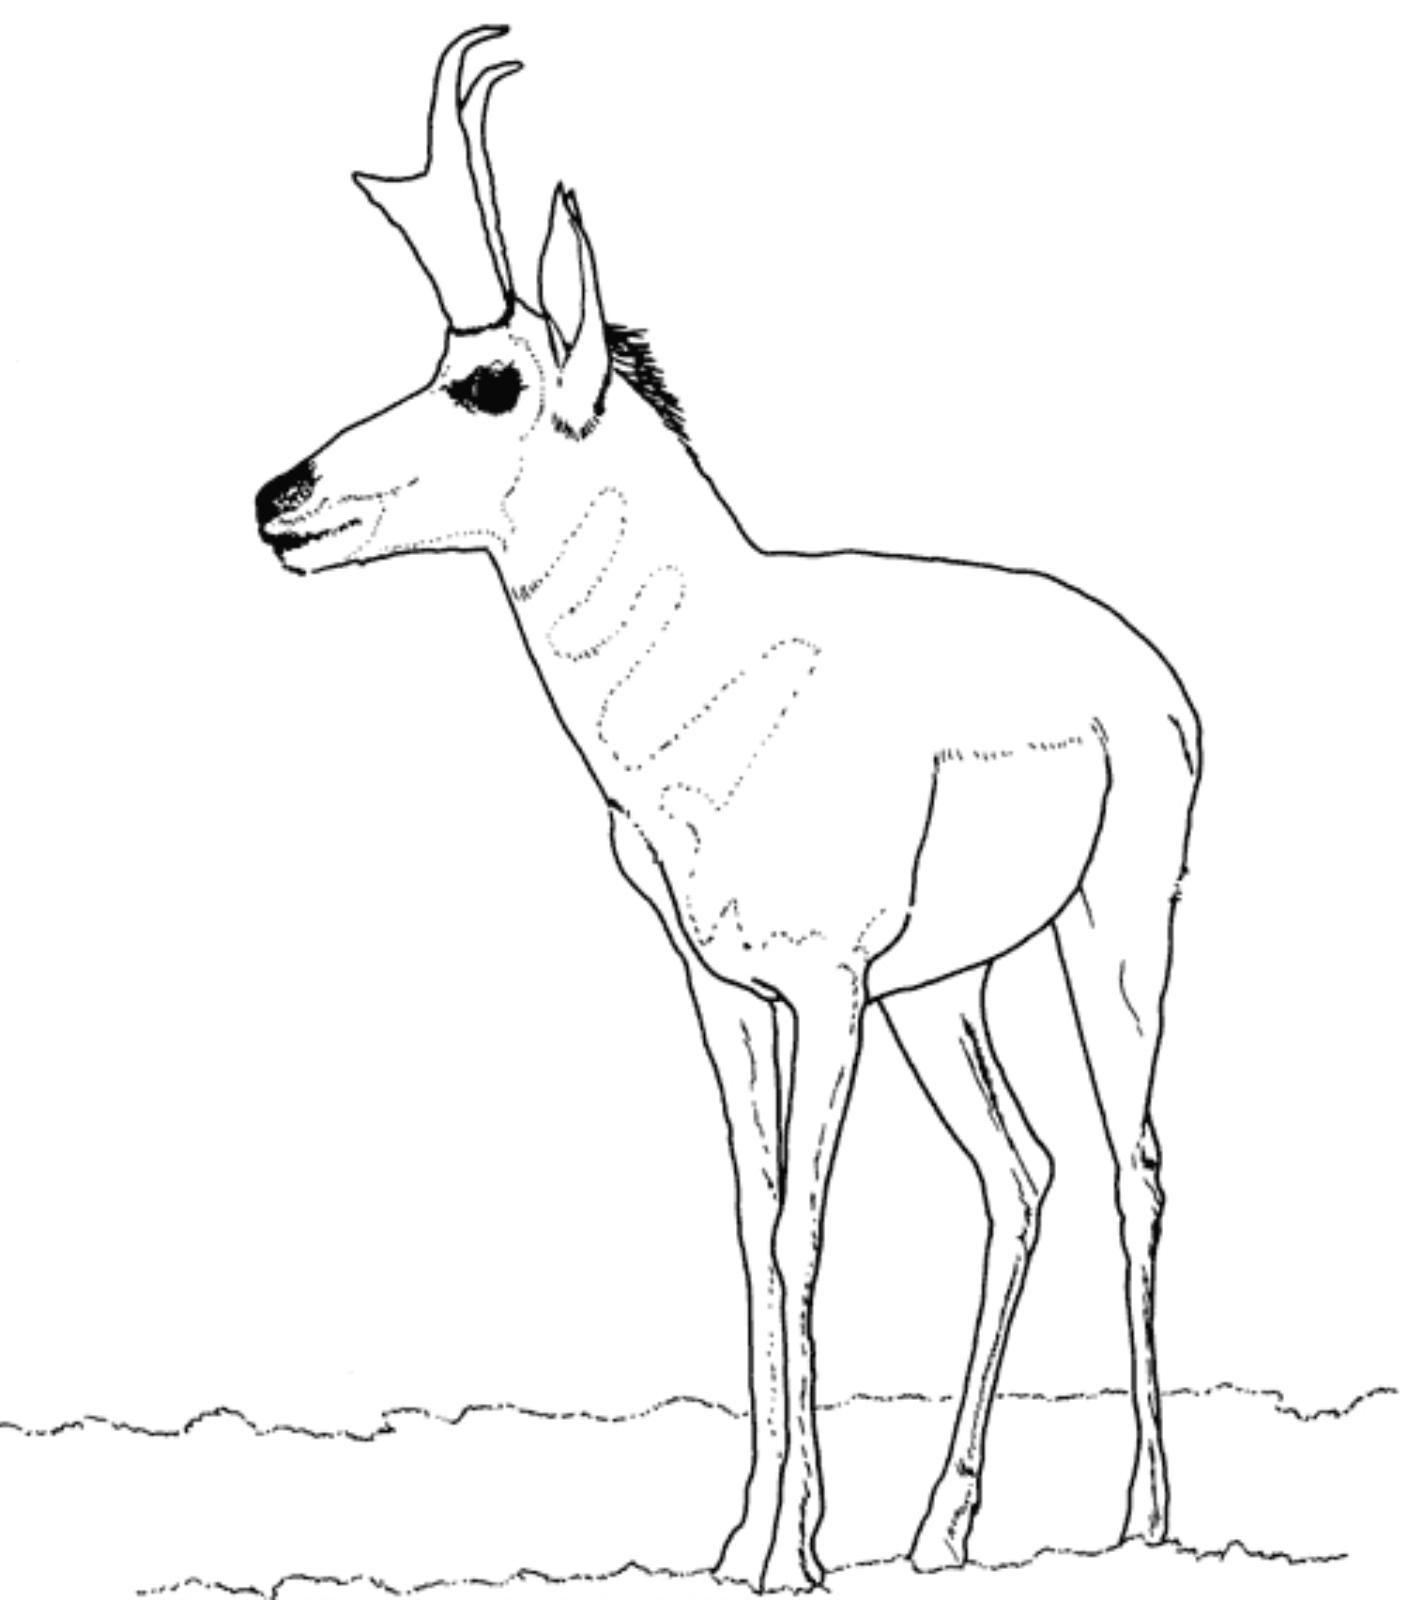 Download Pronghorns coloring for free - Designlooter 2020 👨‍🎨